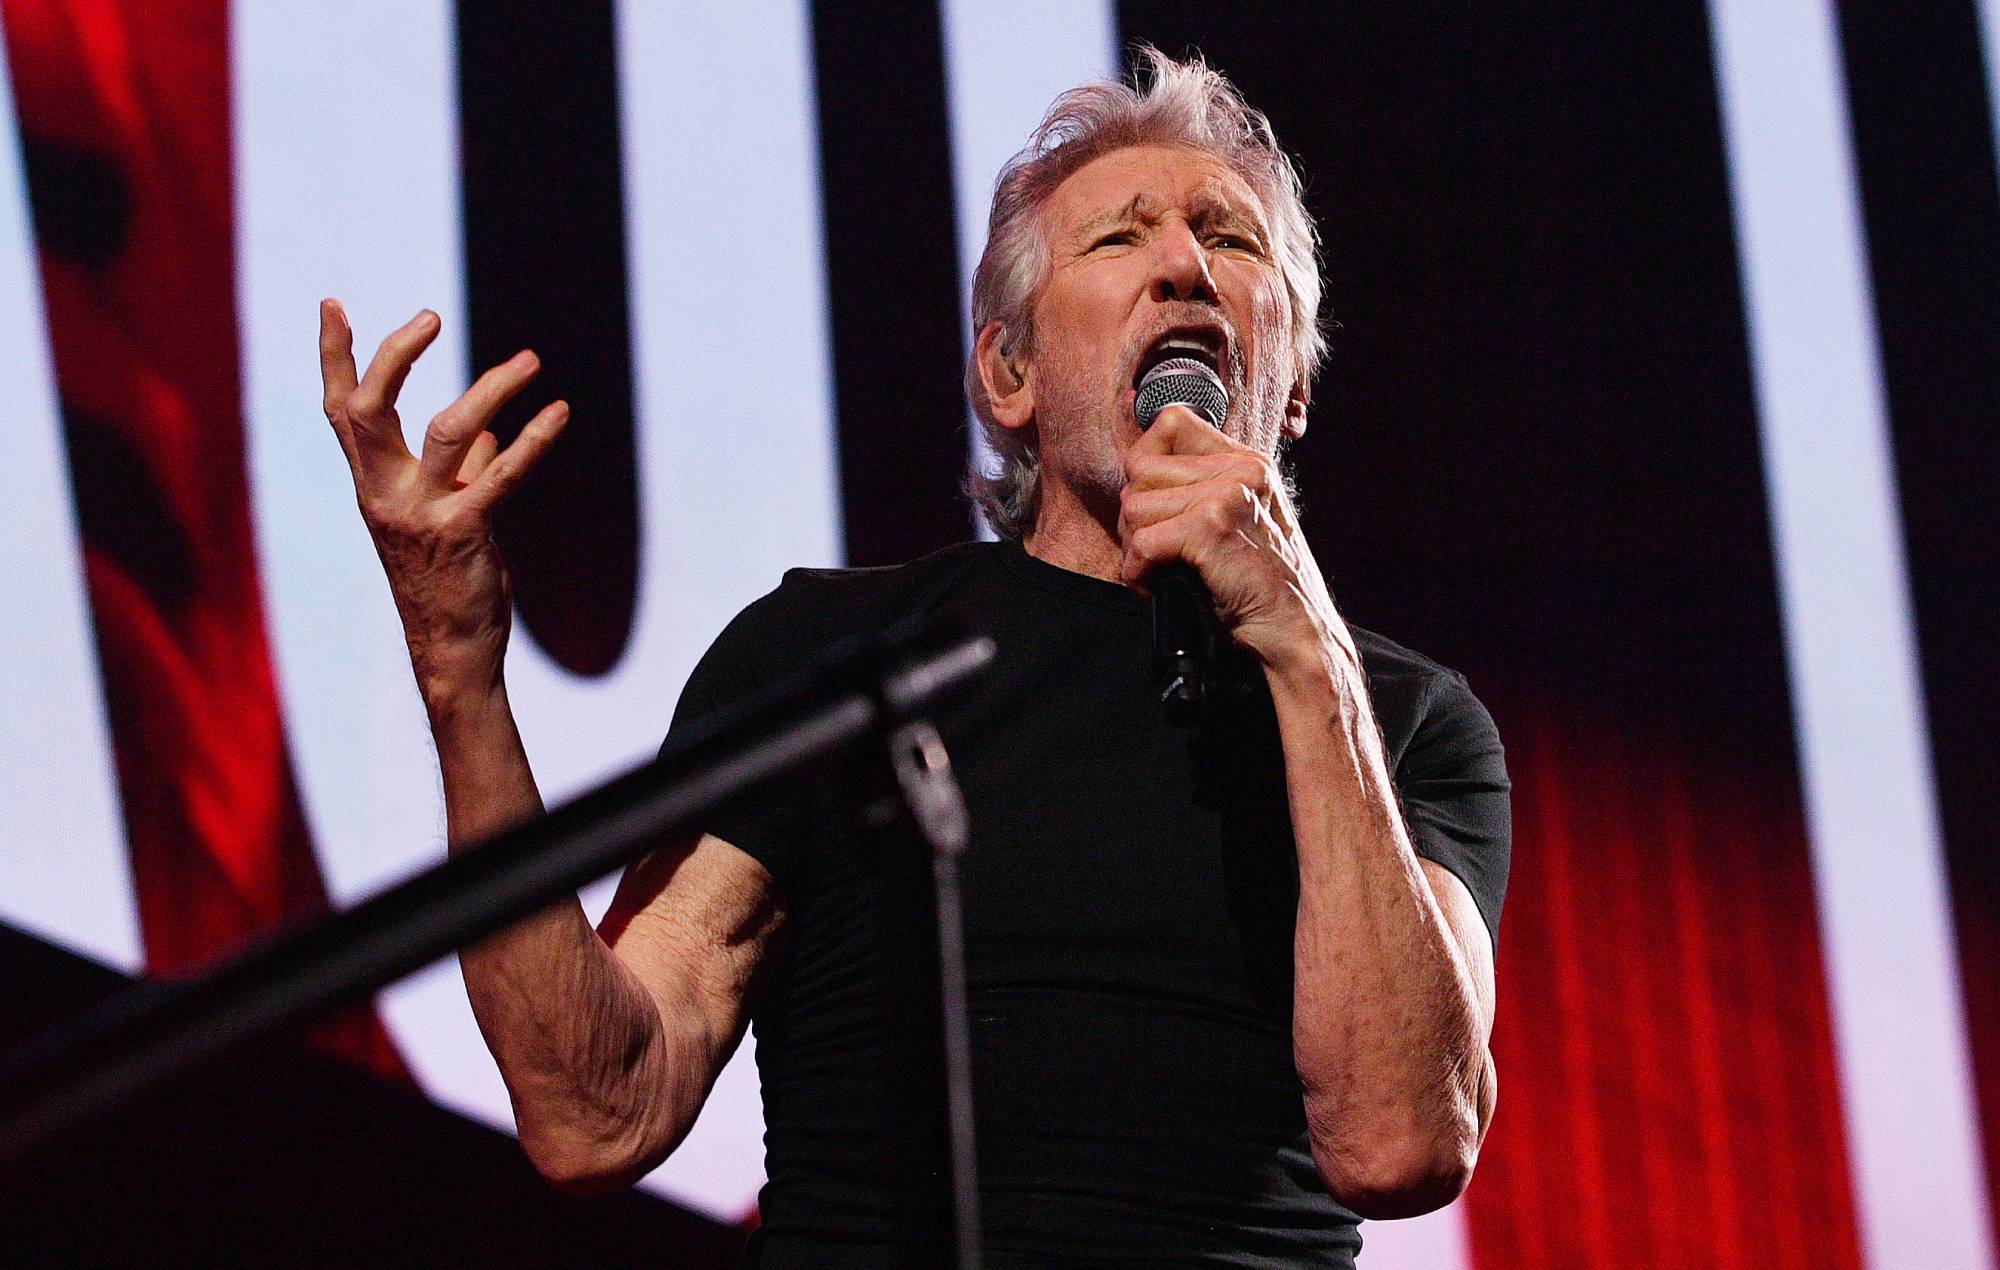 Roger Waters argues Hamas’ “fishy” October 7 attacks could have been “false flag operation”